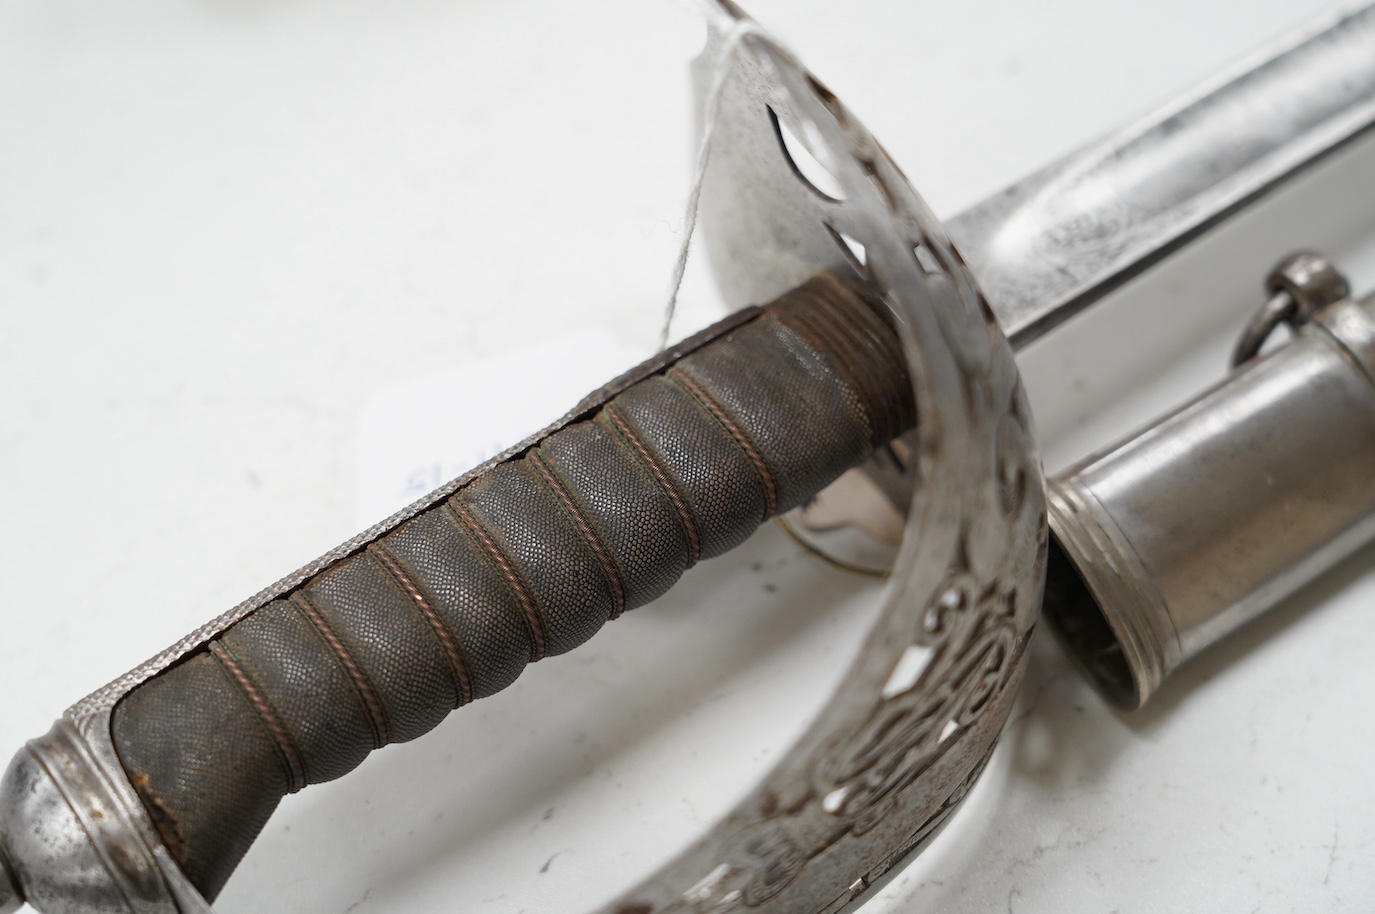 An 1895 pattern late Victorian infantry officer’s sword in its steel scabbard, made by E. Thurkle, 5 Denmark St. Soho, blade 83cm. Condition - good, however scabbard heavily cleaned